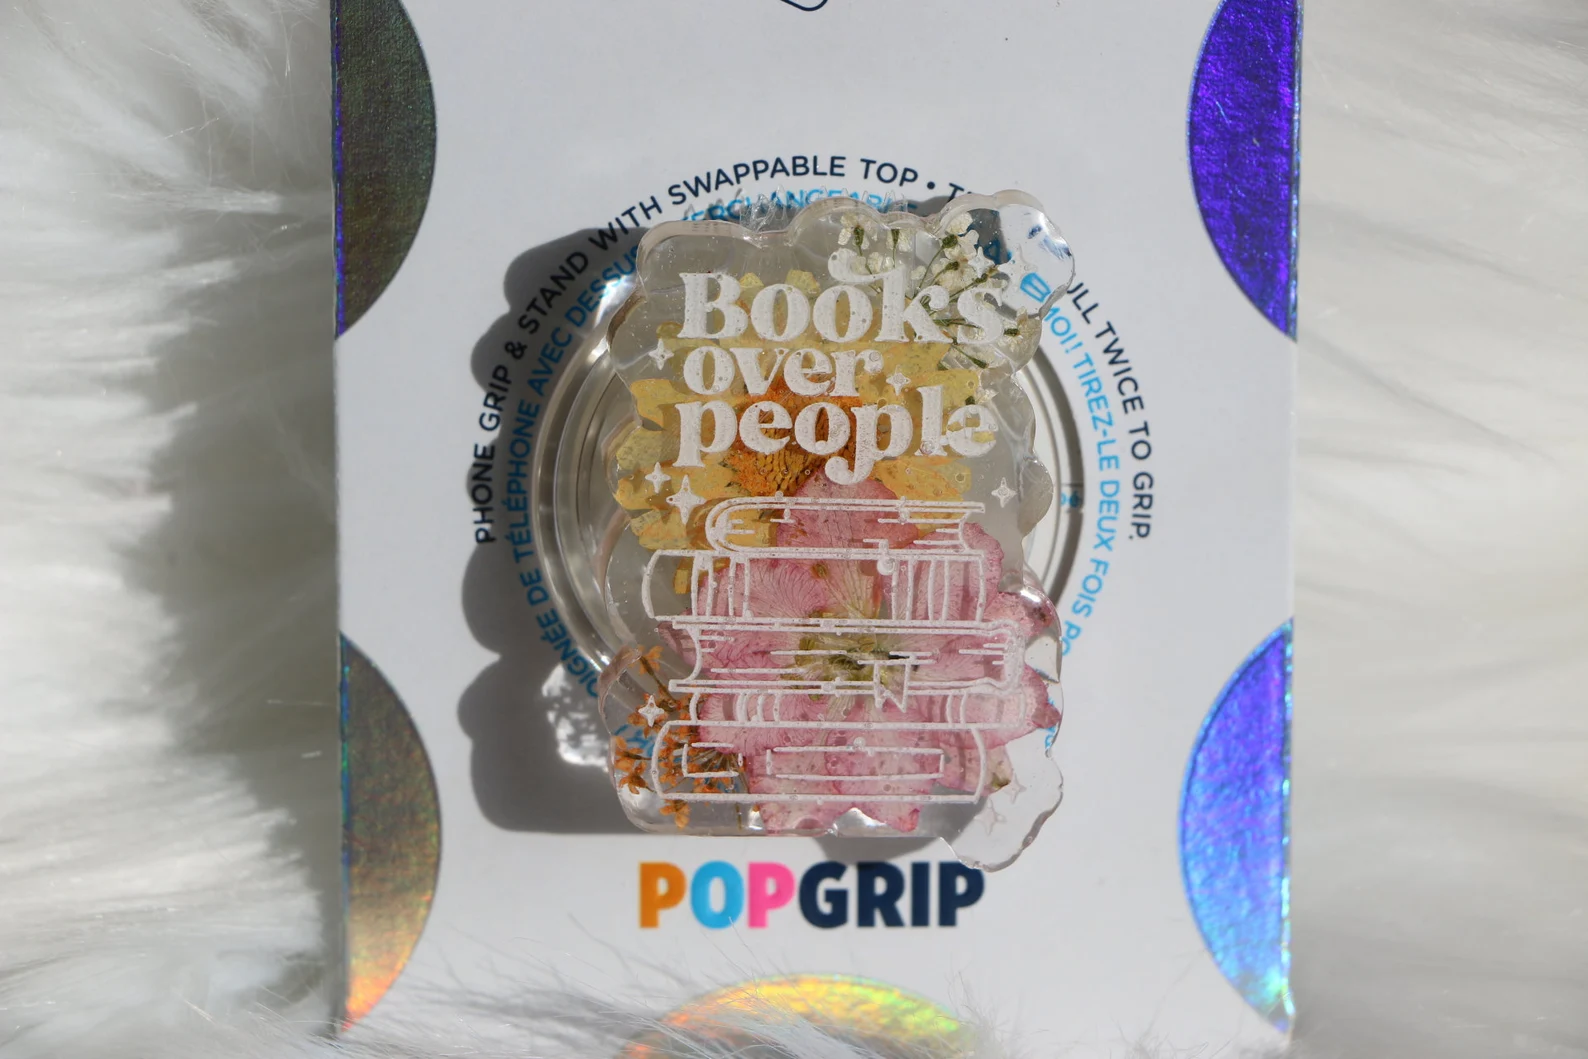 Image of a pop grip that features a stack of books and the words "books over people."